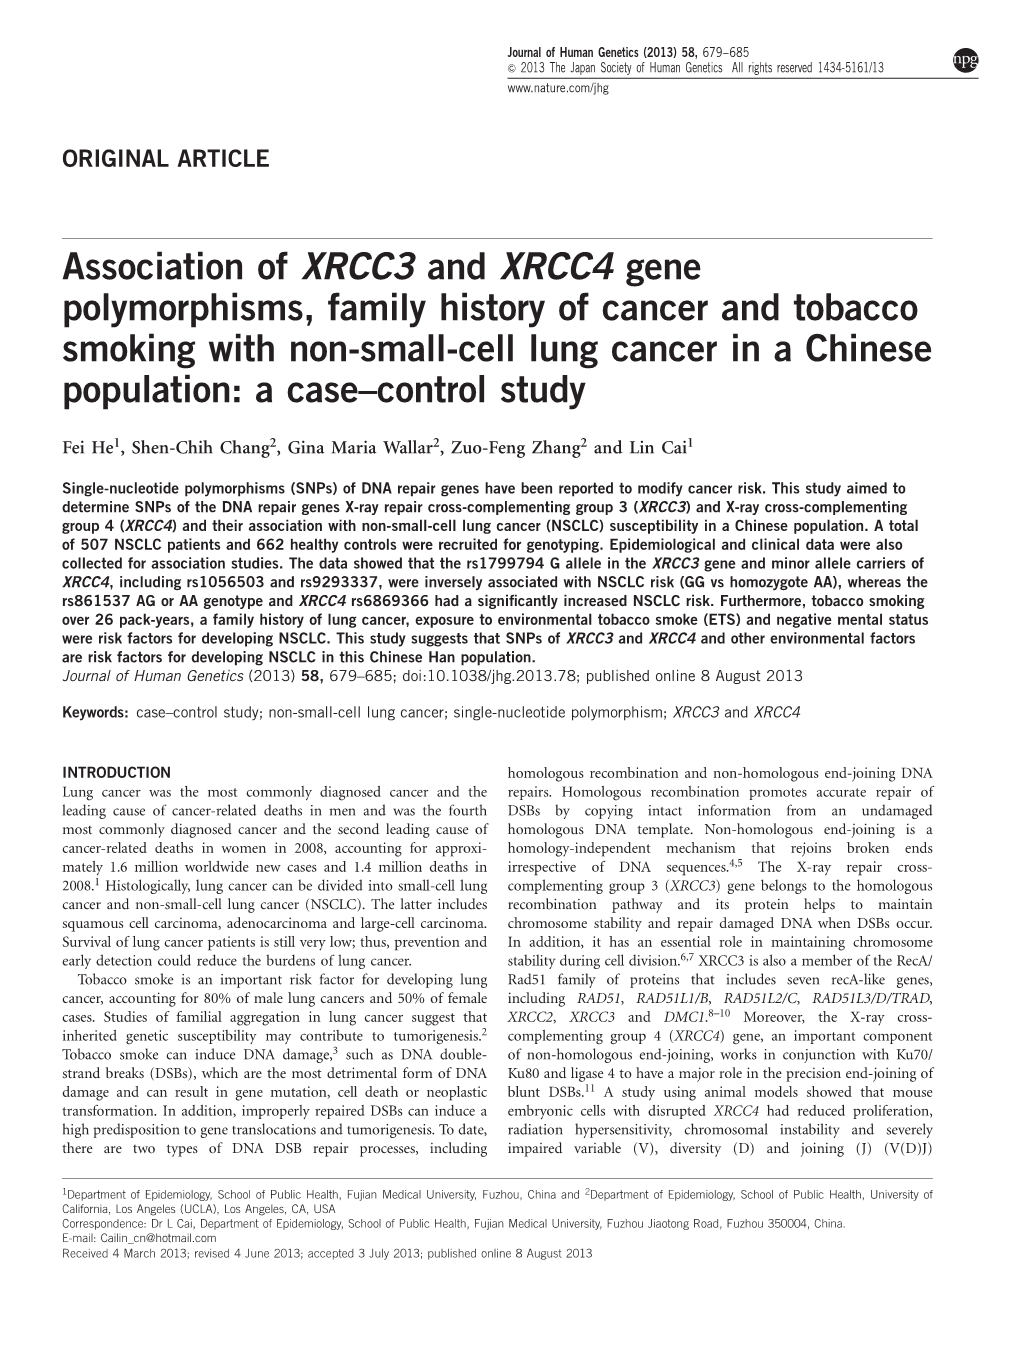 Association of XRCC3 and XRCC4 Gene Polymorphisms, Family History